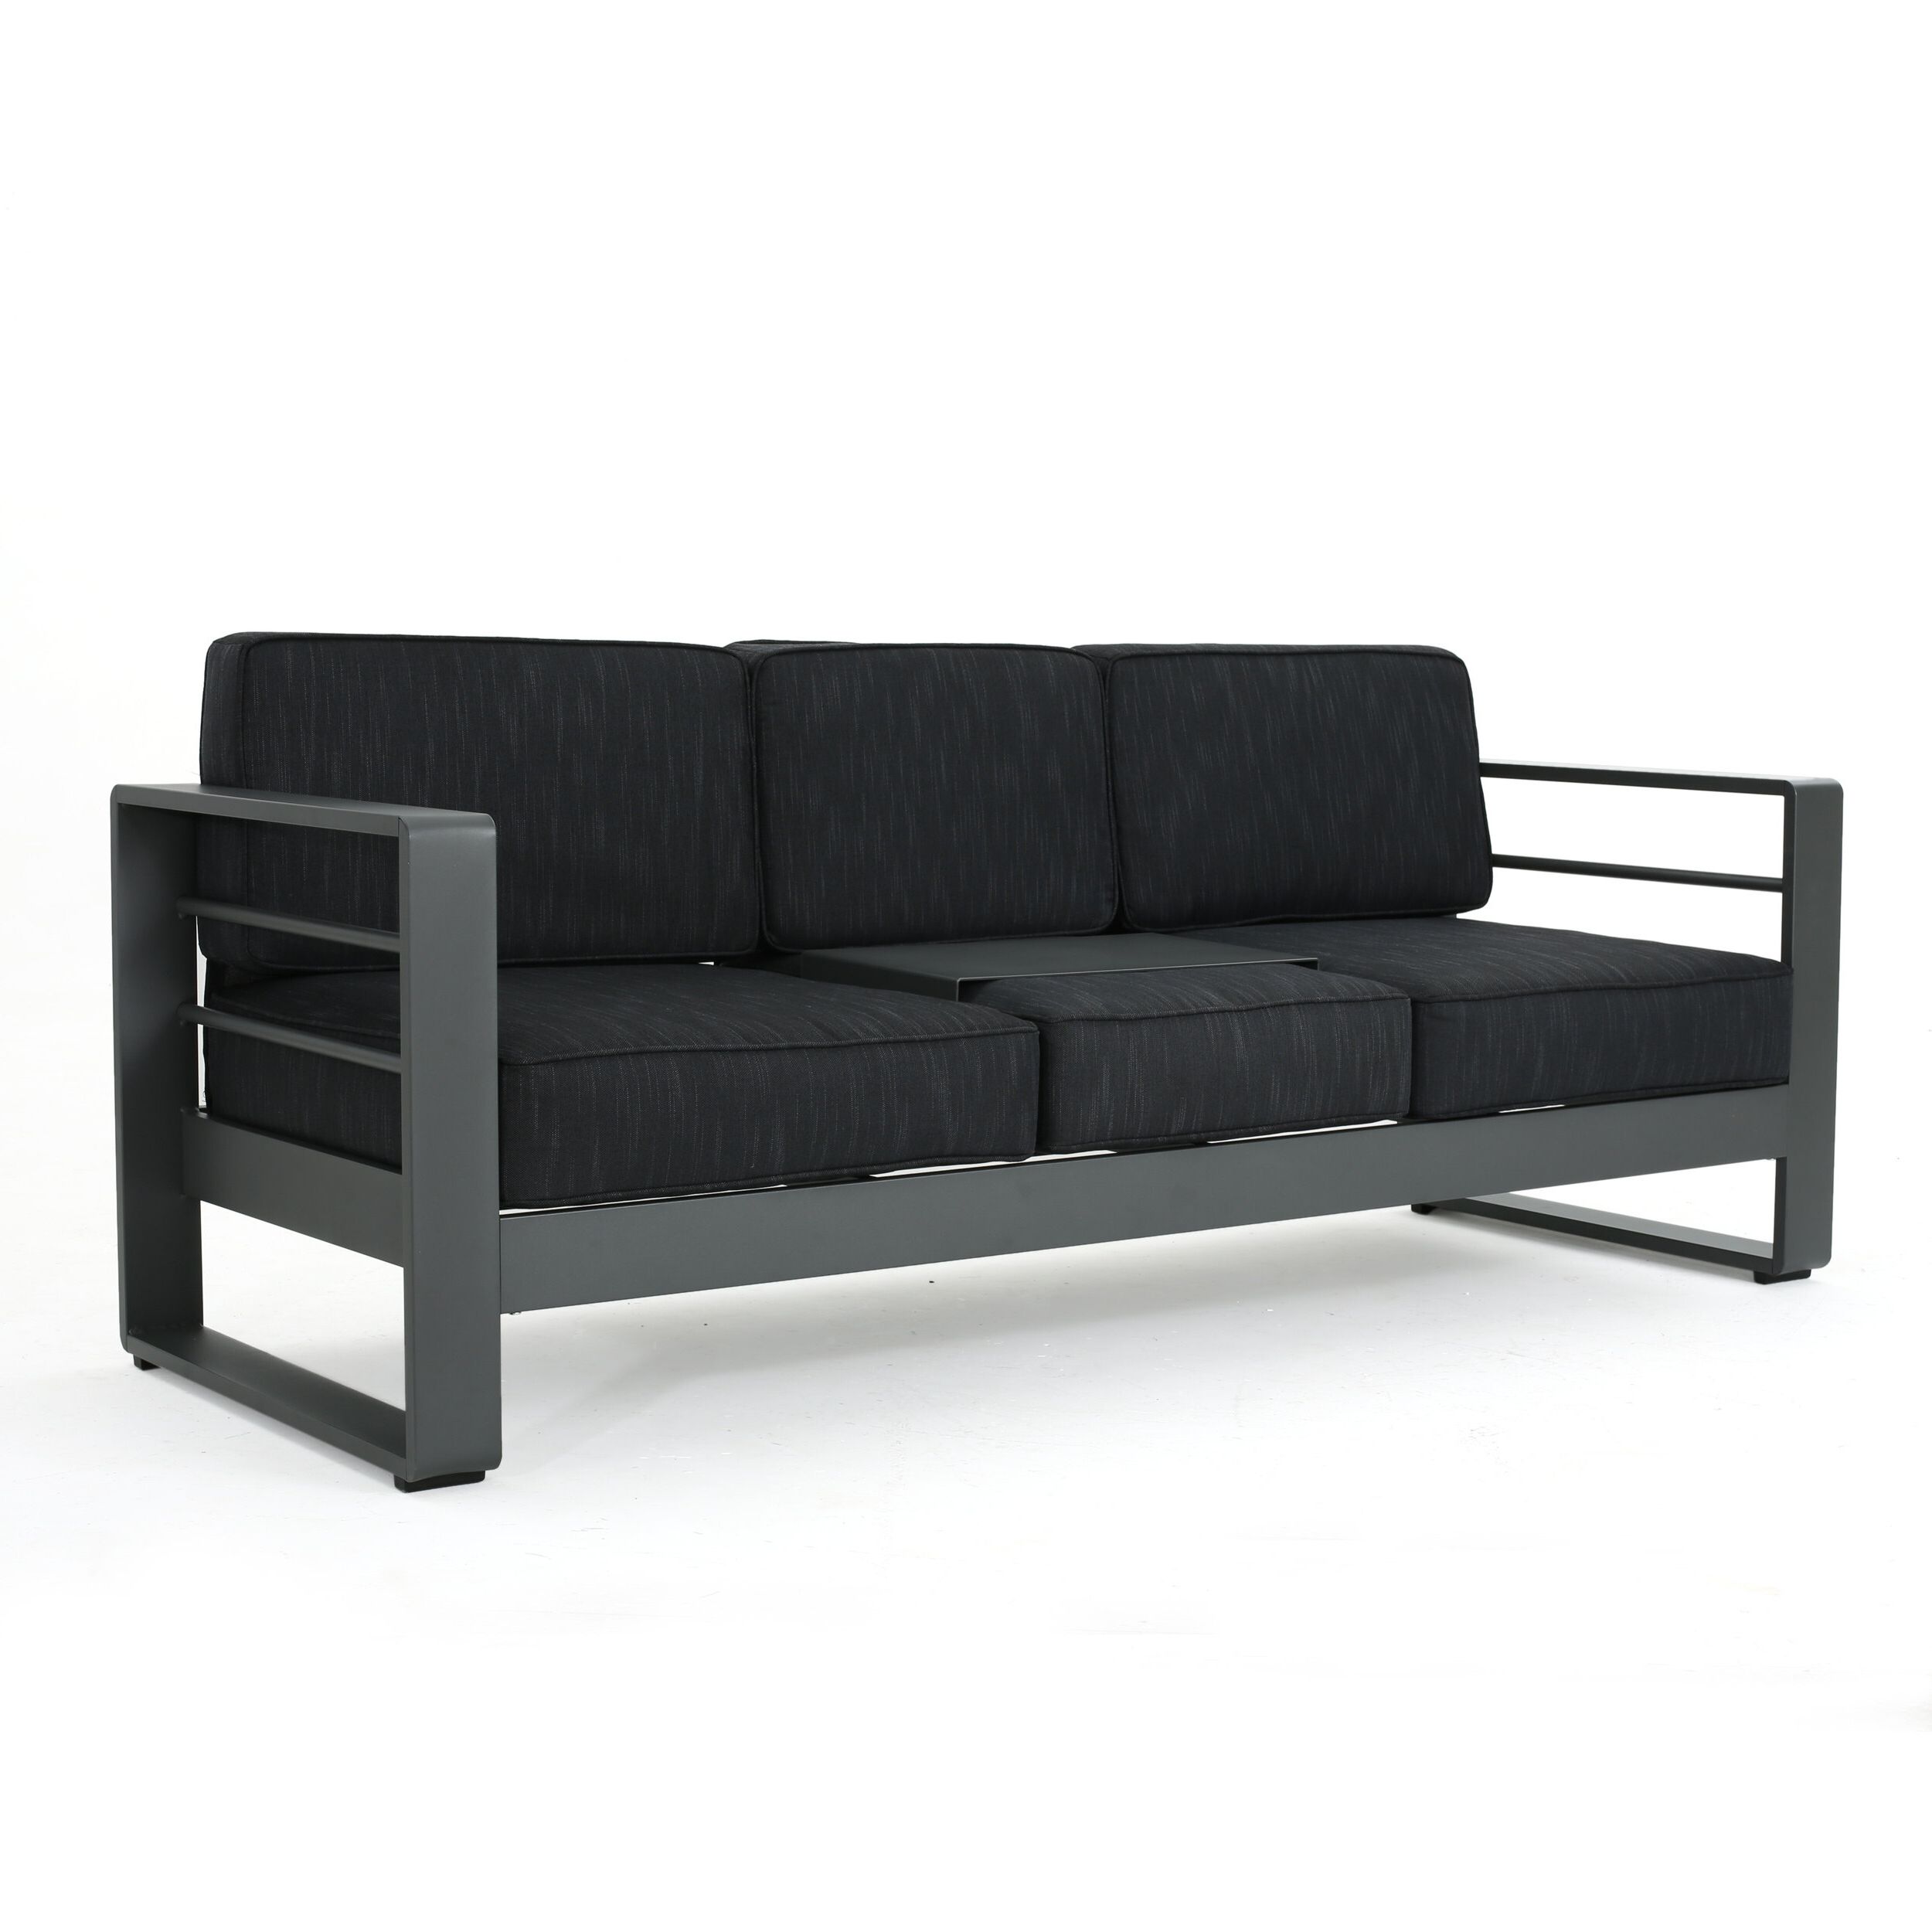 Favorite Royalston Patio Sofa With Cushions Intended For Lobdell Patio Sofas With Cushions (View 8 of 25)